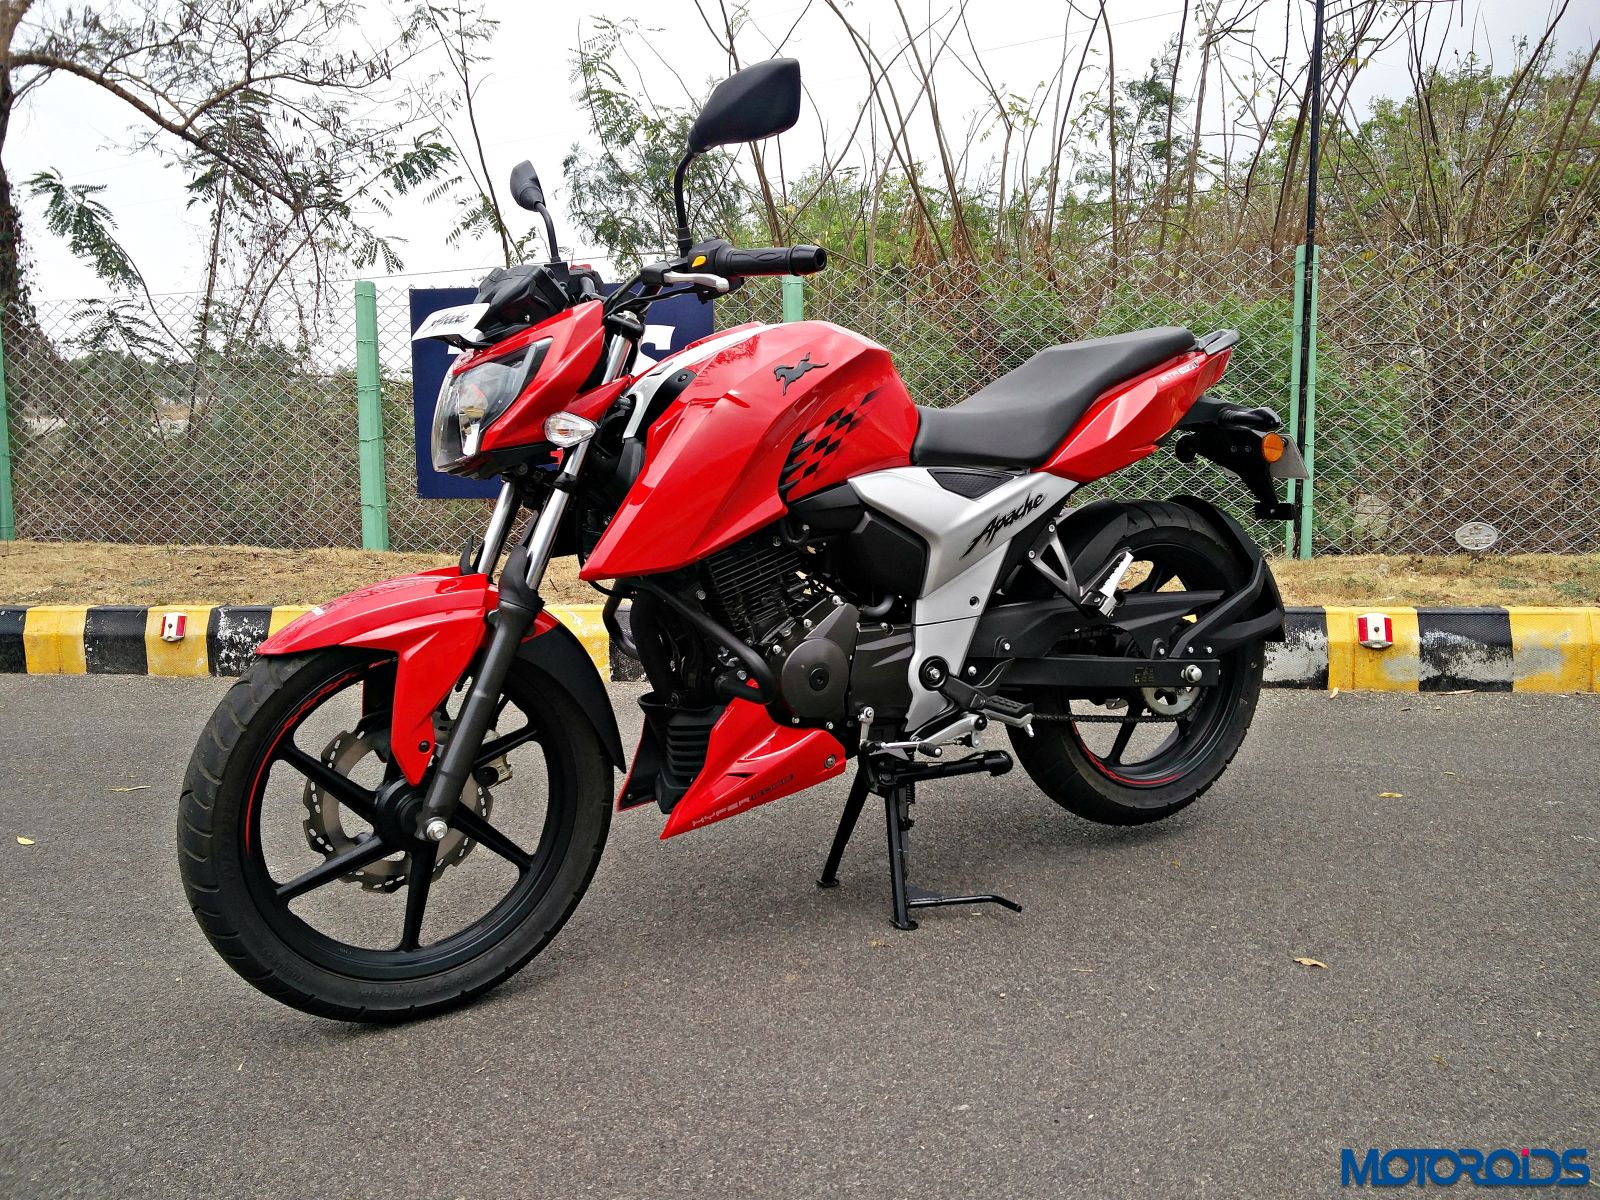 New 2018 Tvs Apache Rtr160 4v First Ride Review Motoroids